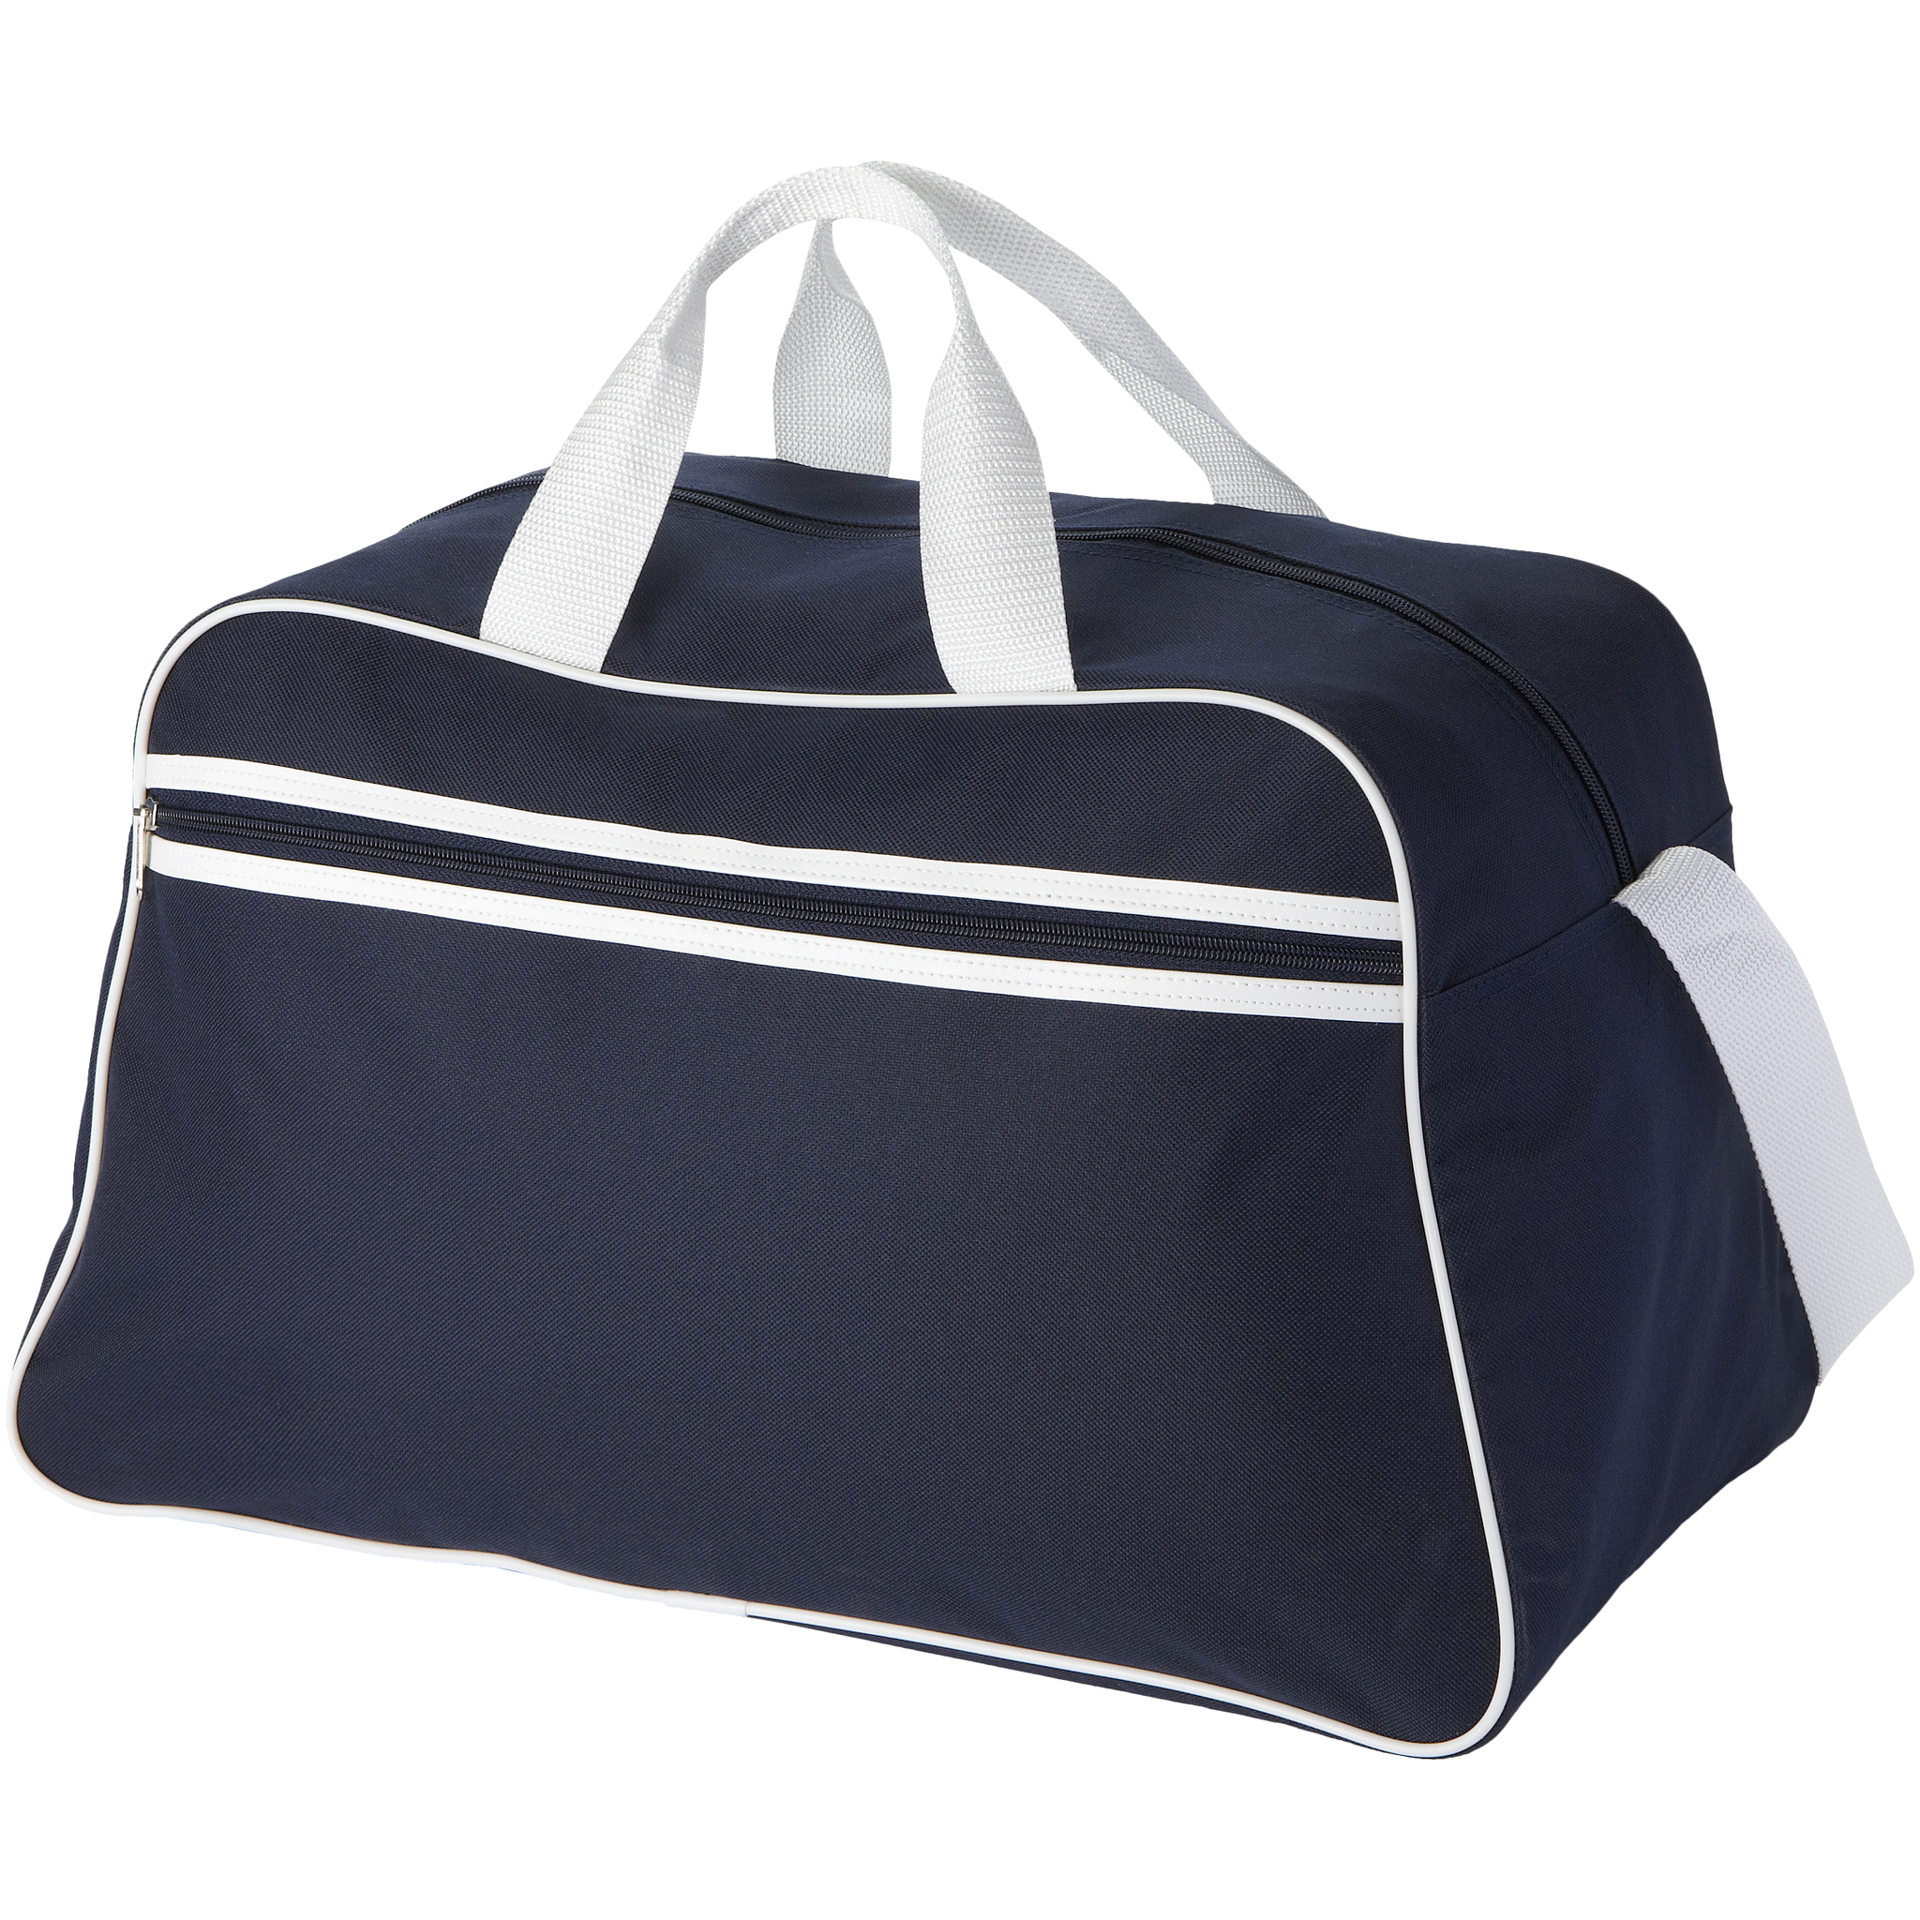 San Jose Sports Bag in navy and white